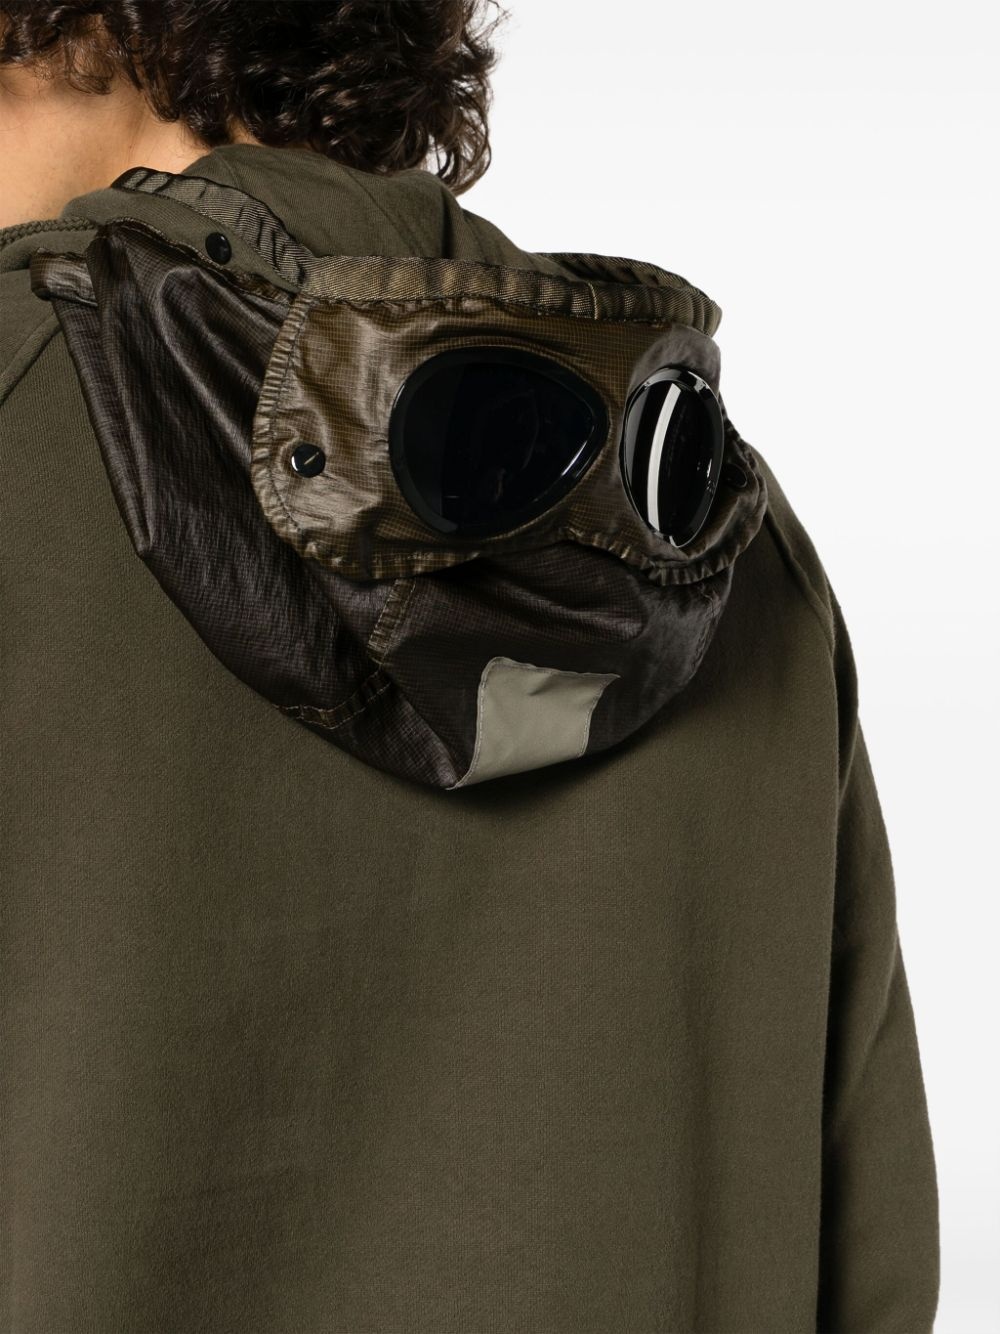 Goggles-detail cotton hoodie - 5